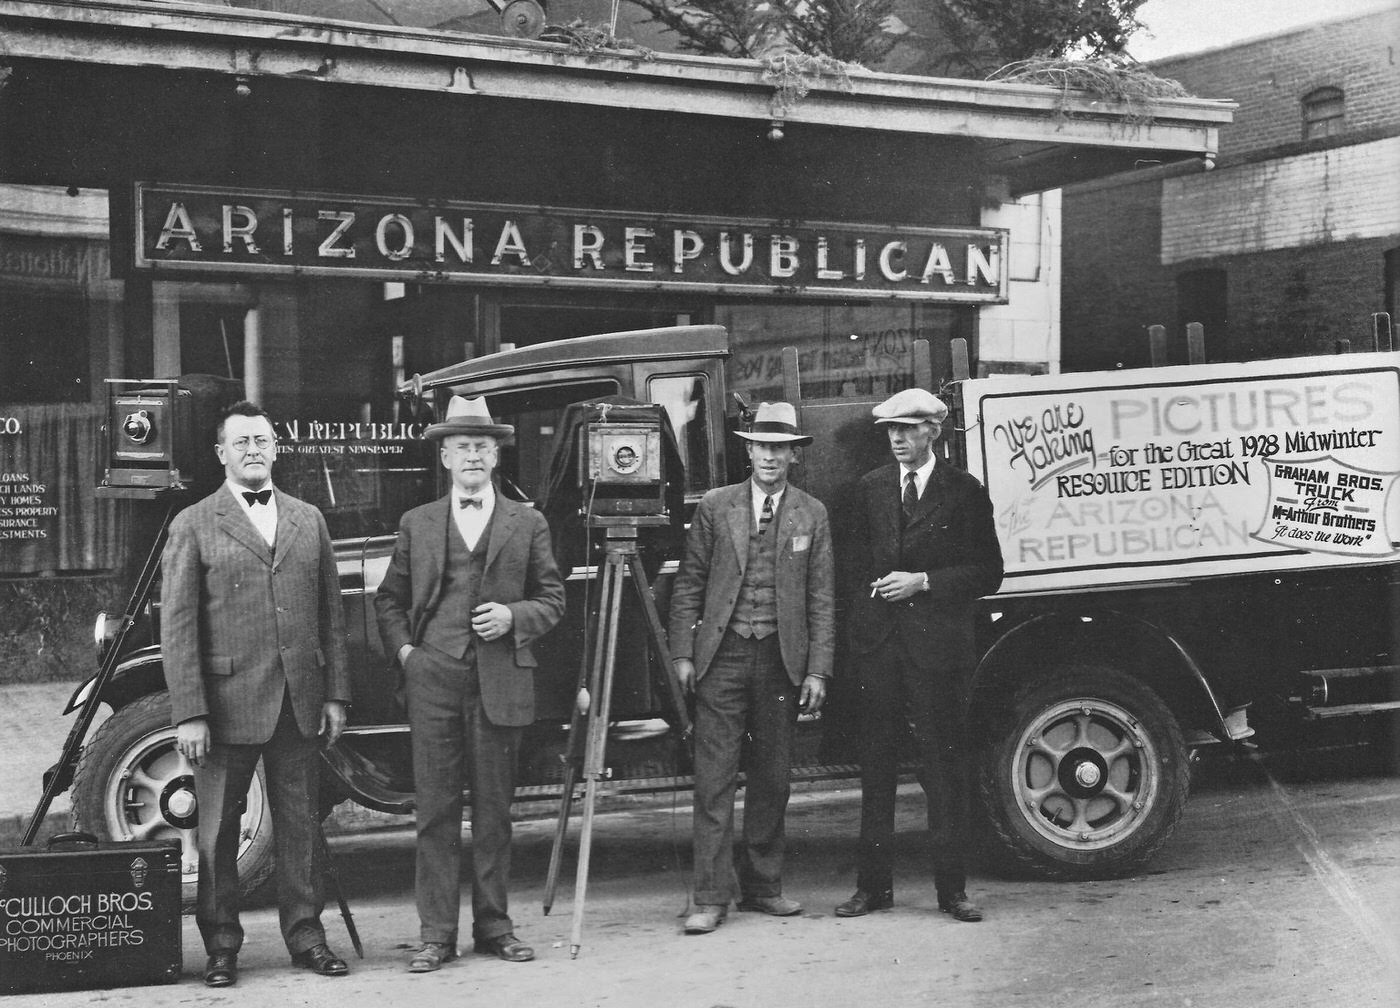 The McCulloch Brothers Commercial Photographers posing in 1928 outside the Arizona Republican offices.